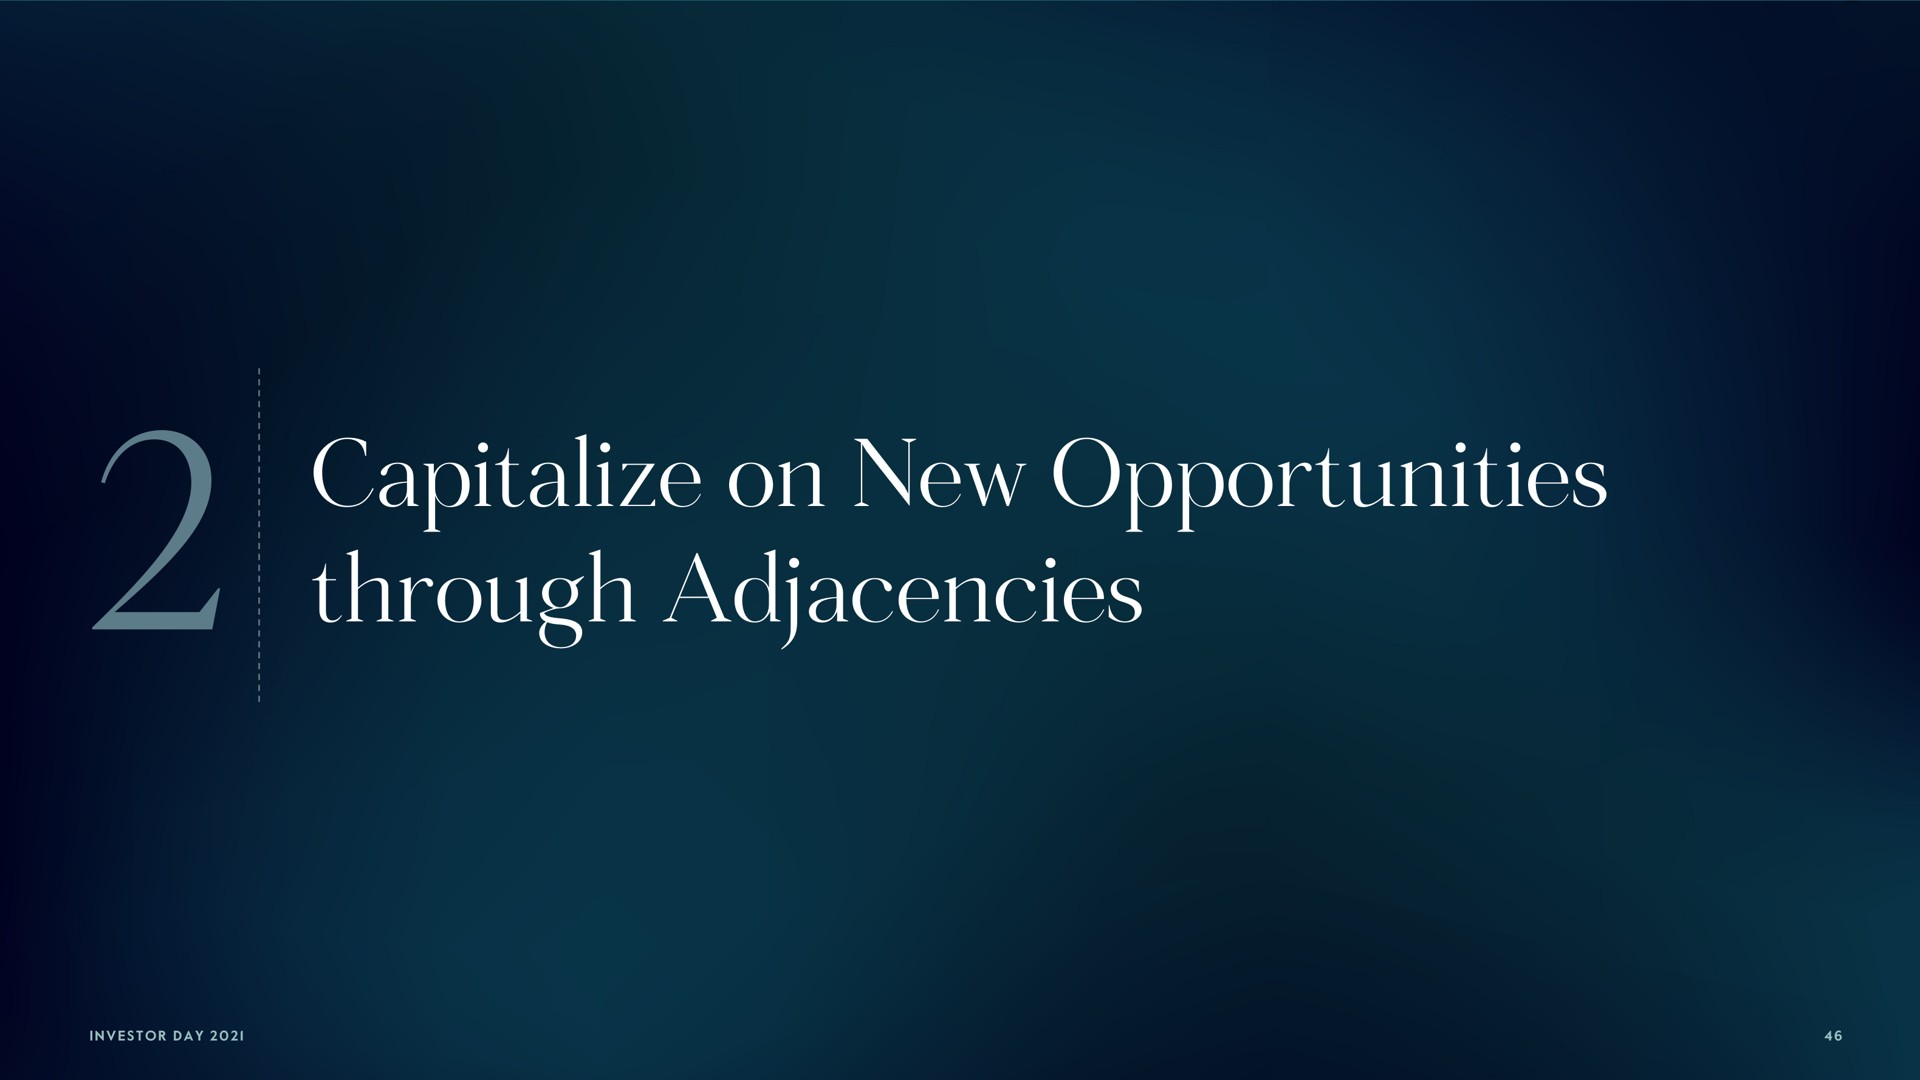 capitalize on new opportunities through adjacencies | Carlyle